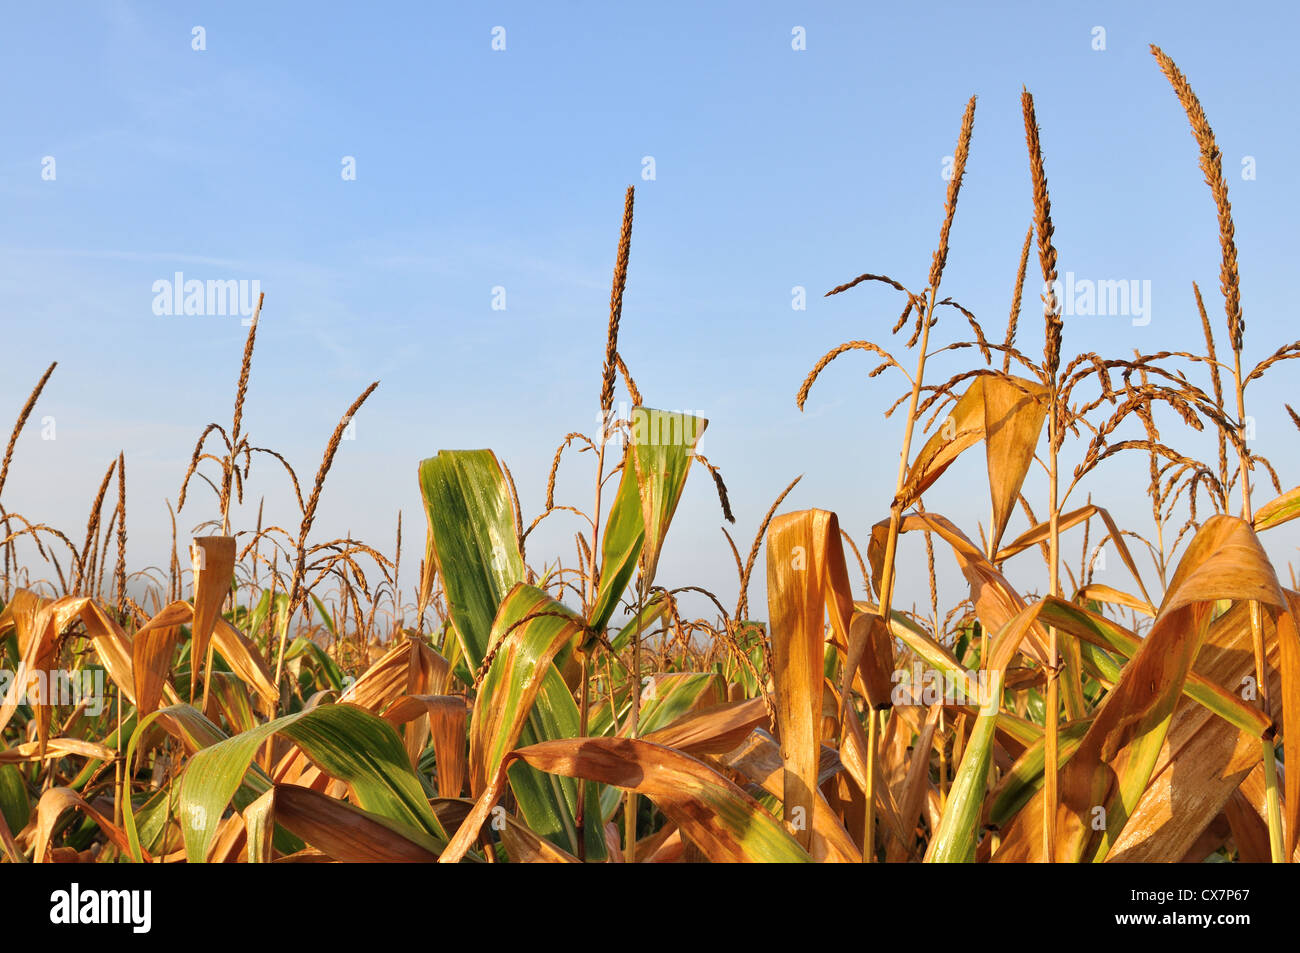 golden leaves of maize under blue sky Stock Photo